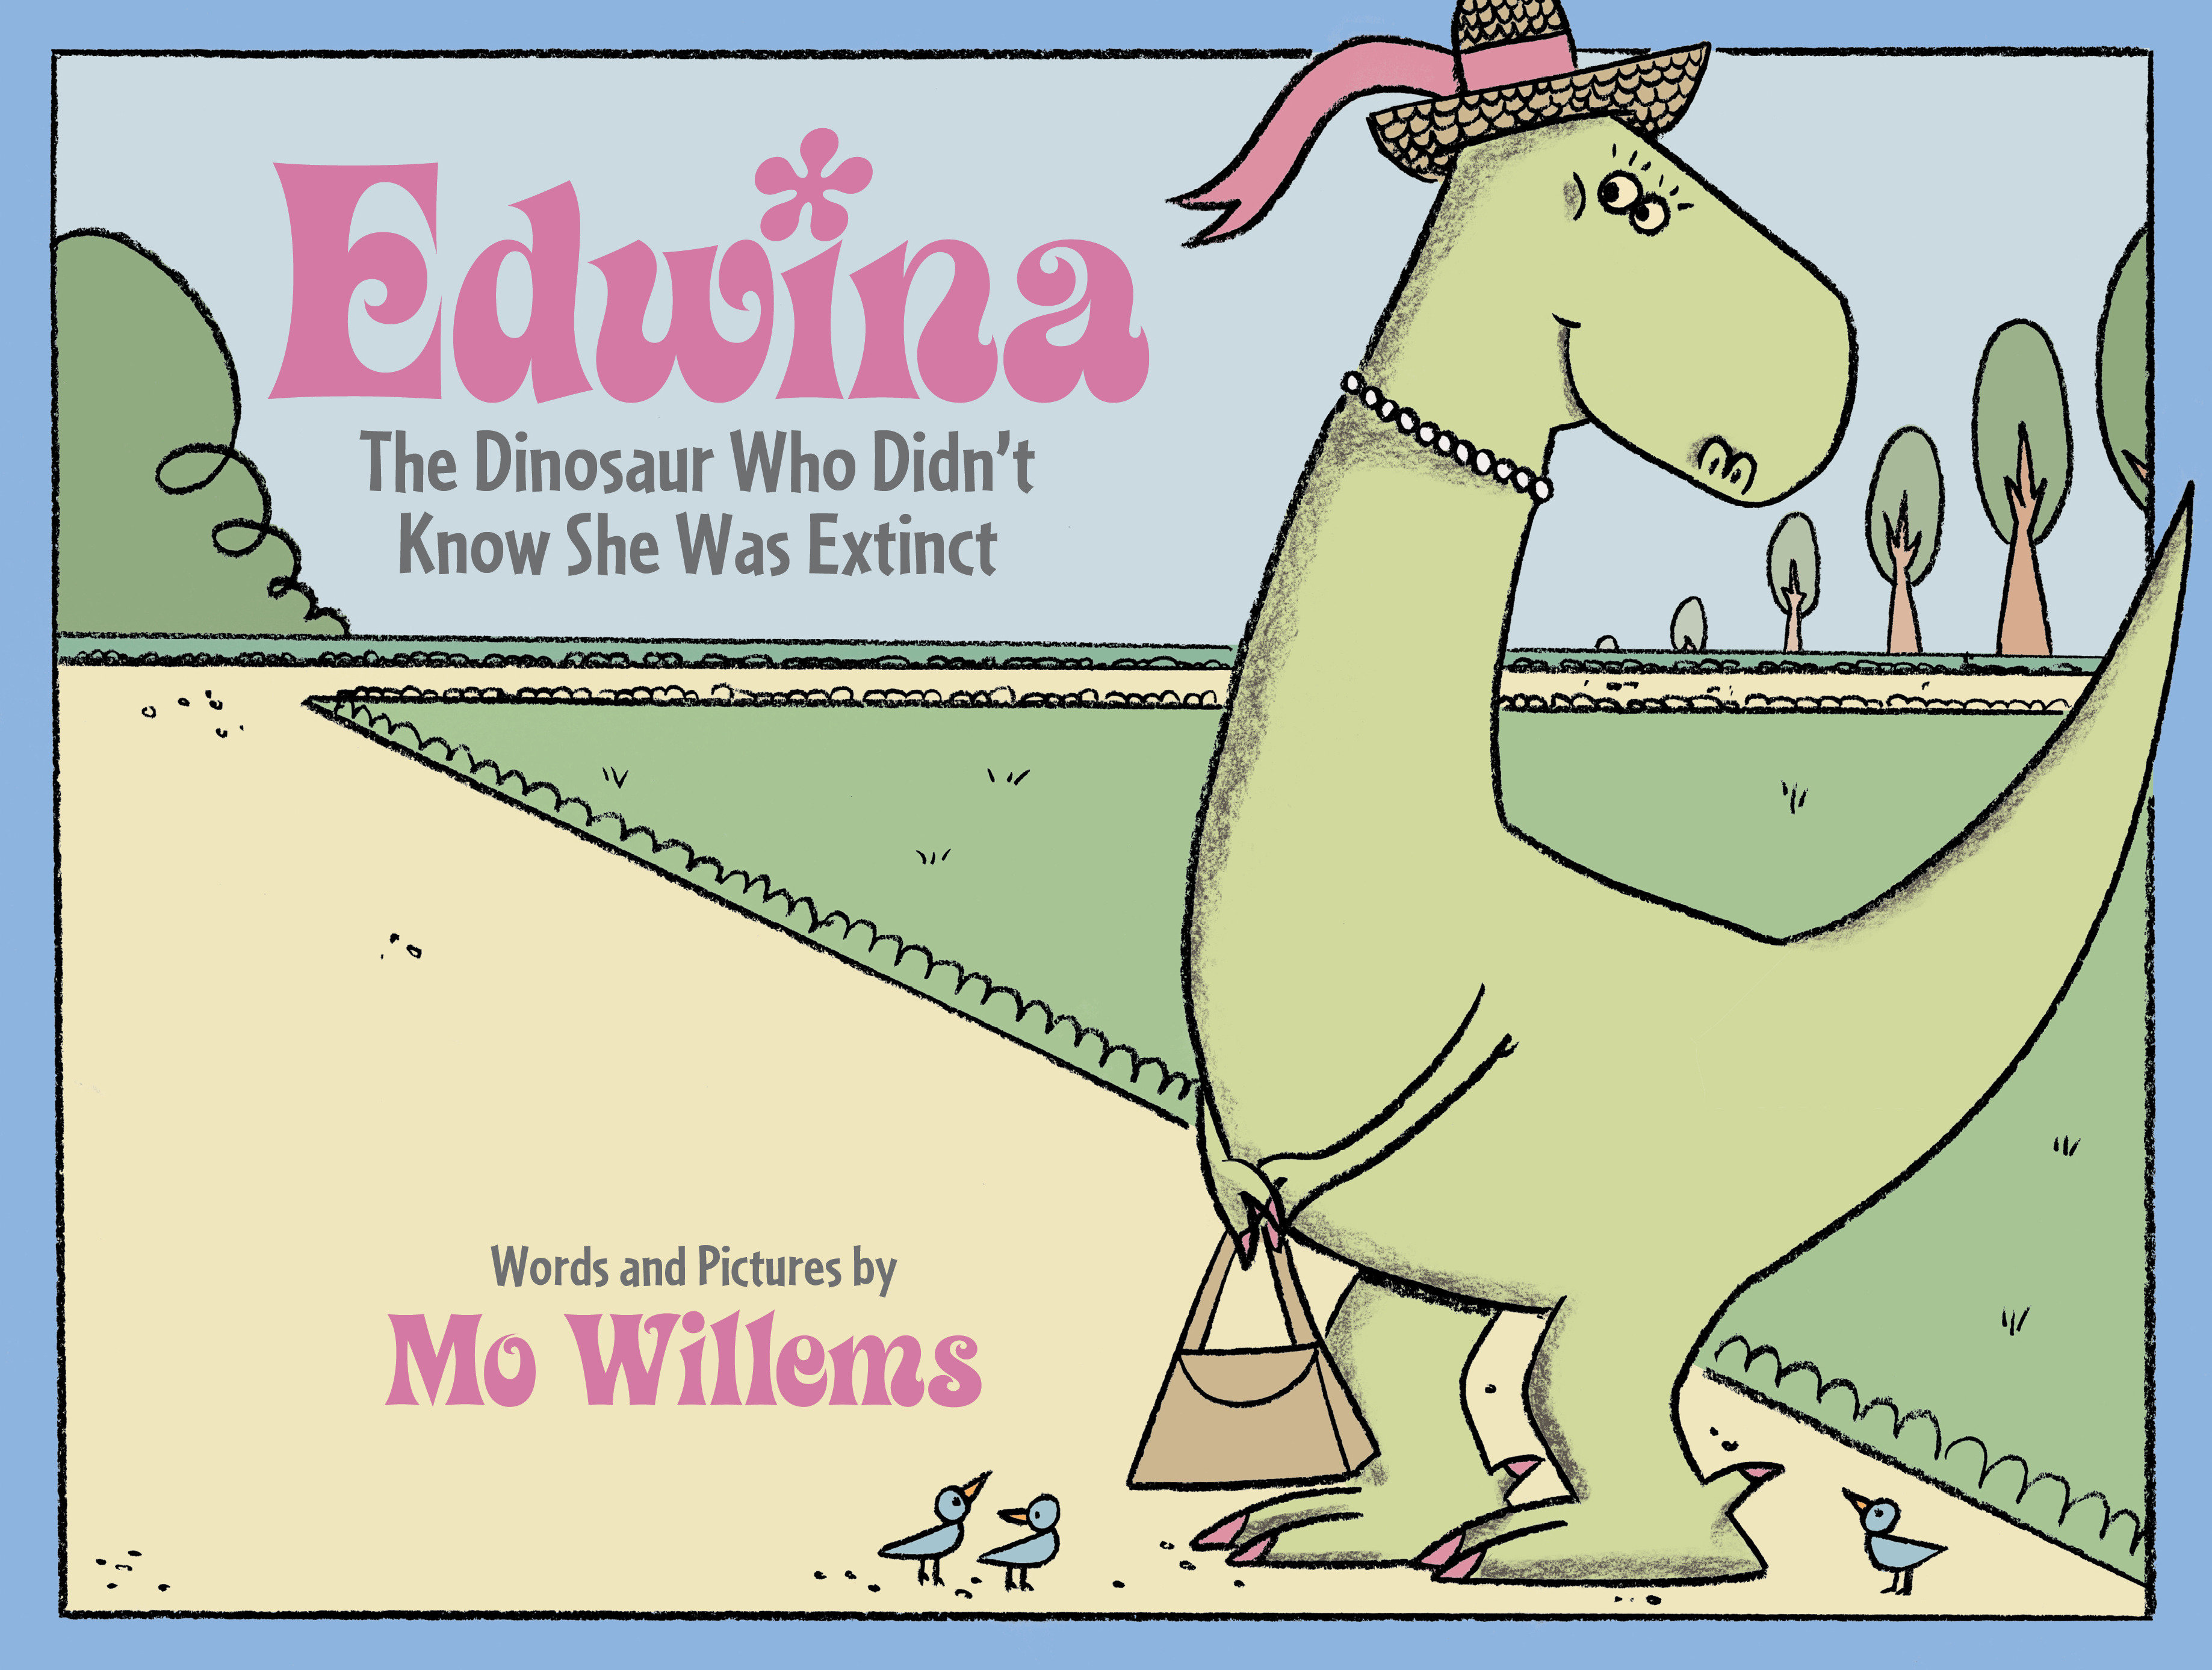 Edwina, The Dinosaur Who Didn'T Know She Was Extinct (Hardcover Book)